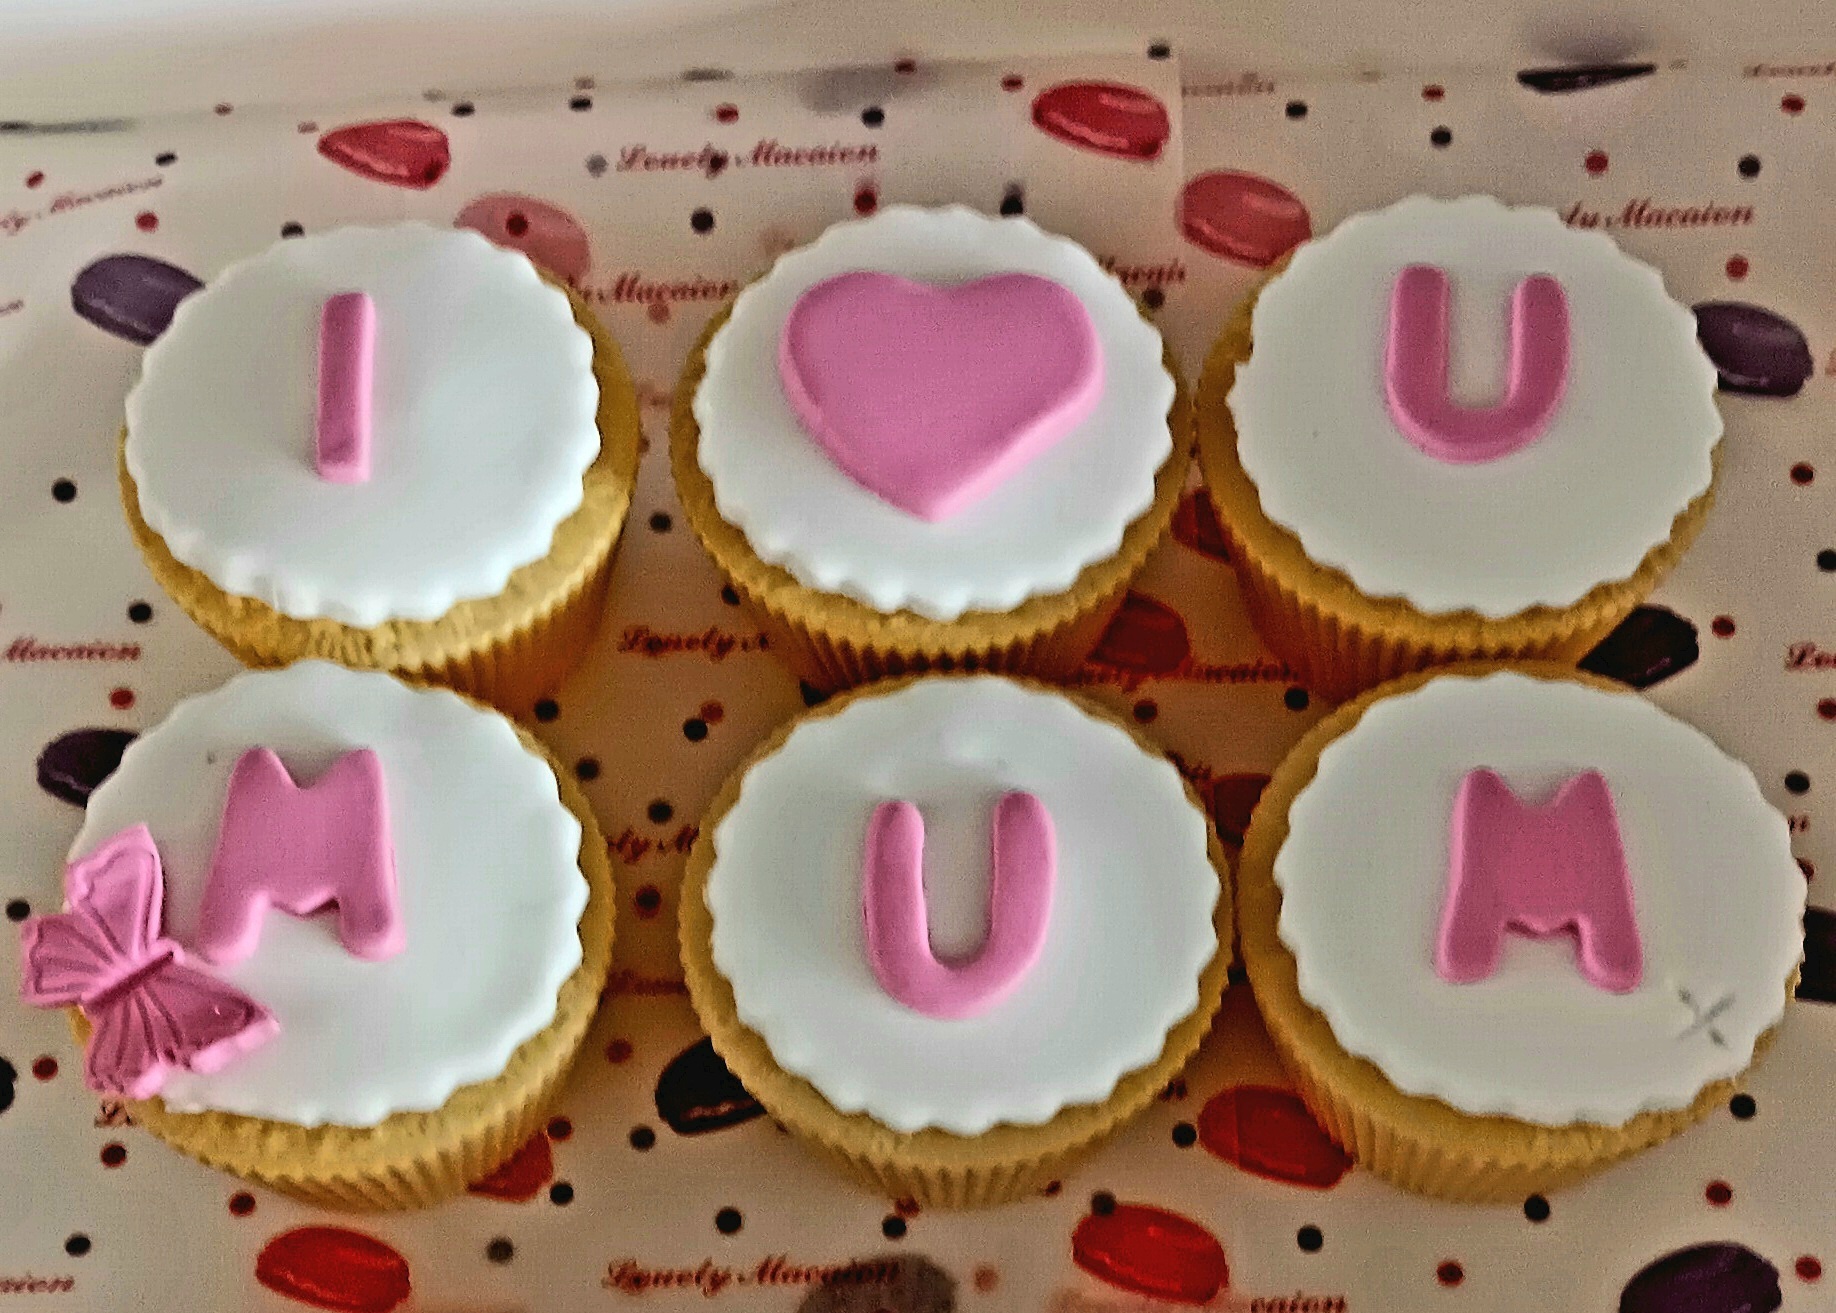 "I love you mum"  mothers day box of cupcakes